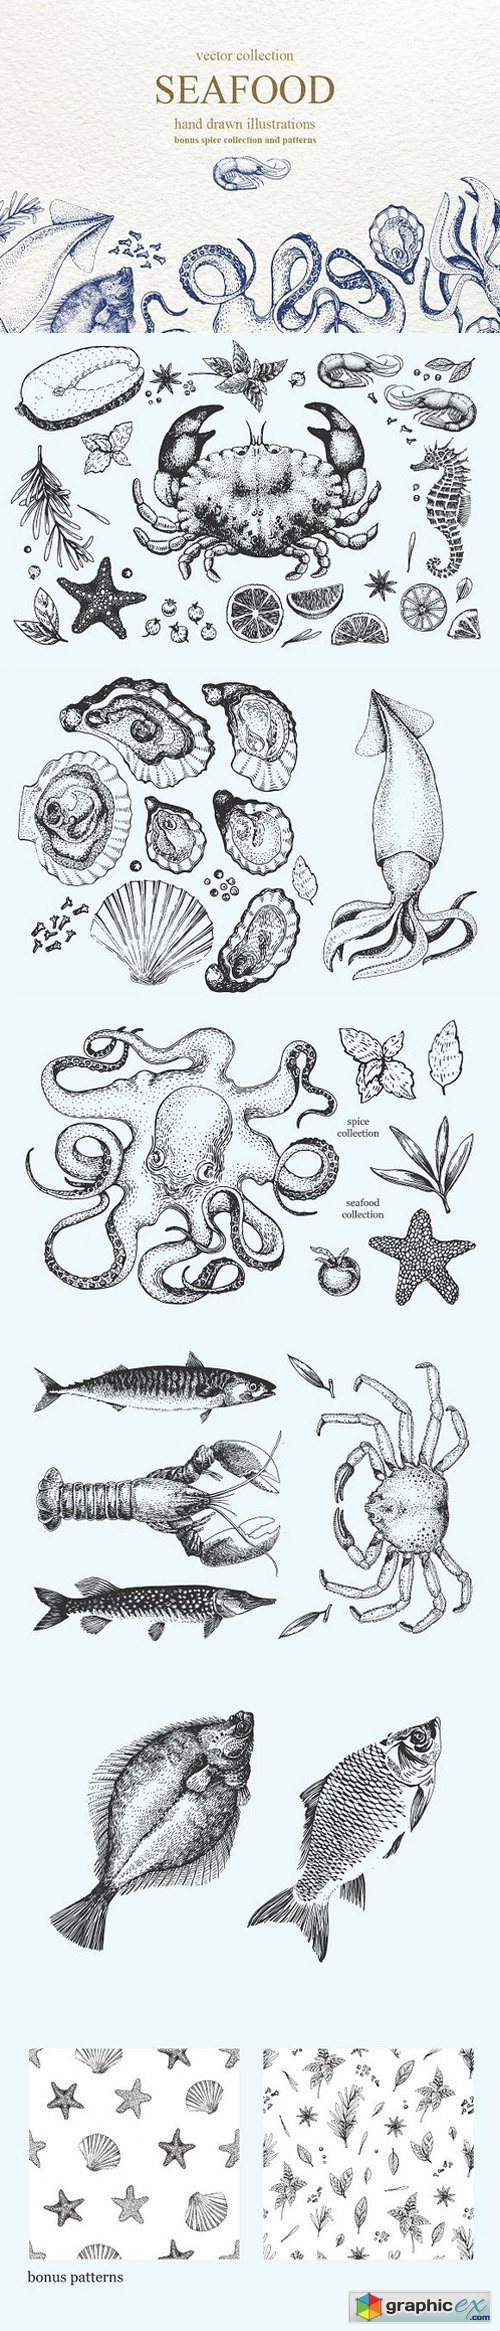 Vector seafood collection